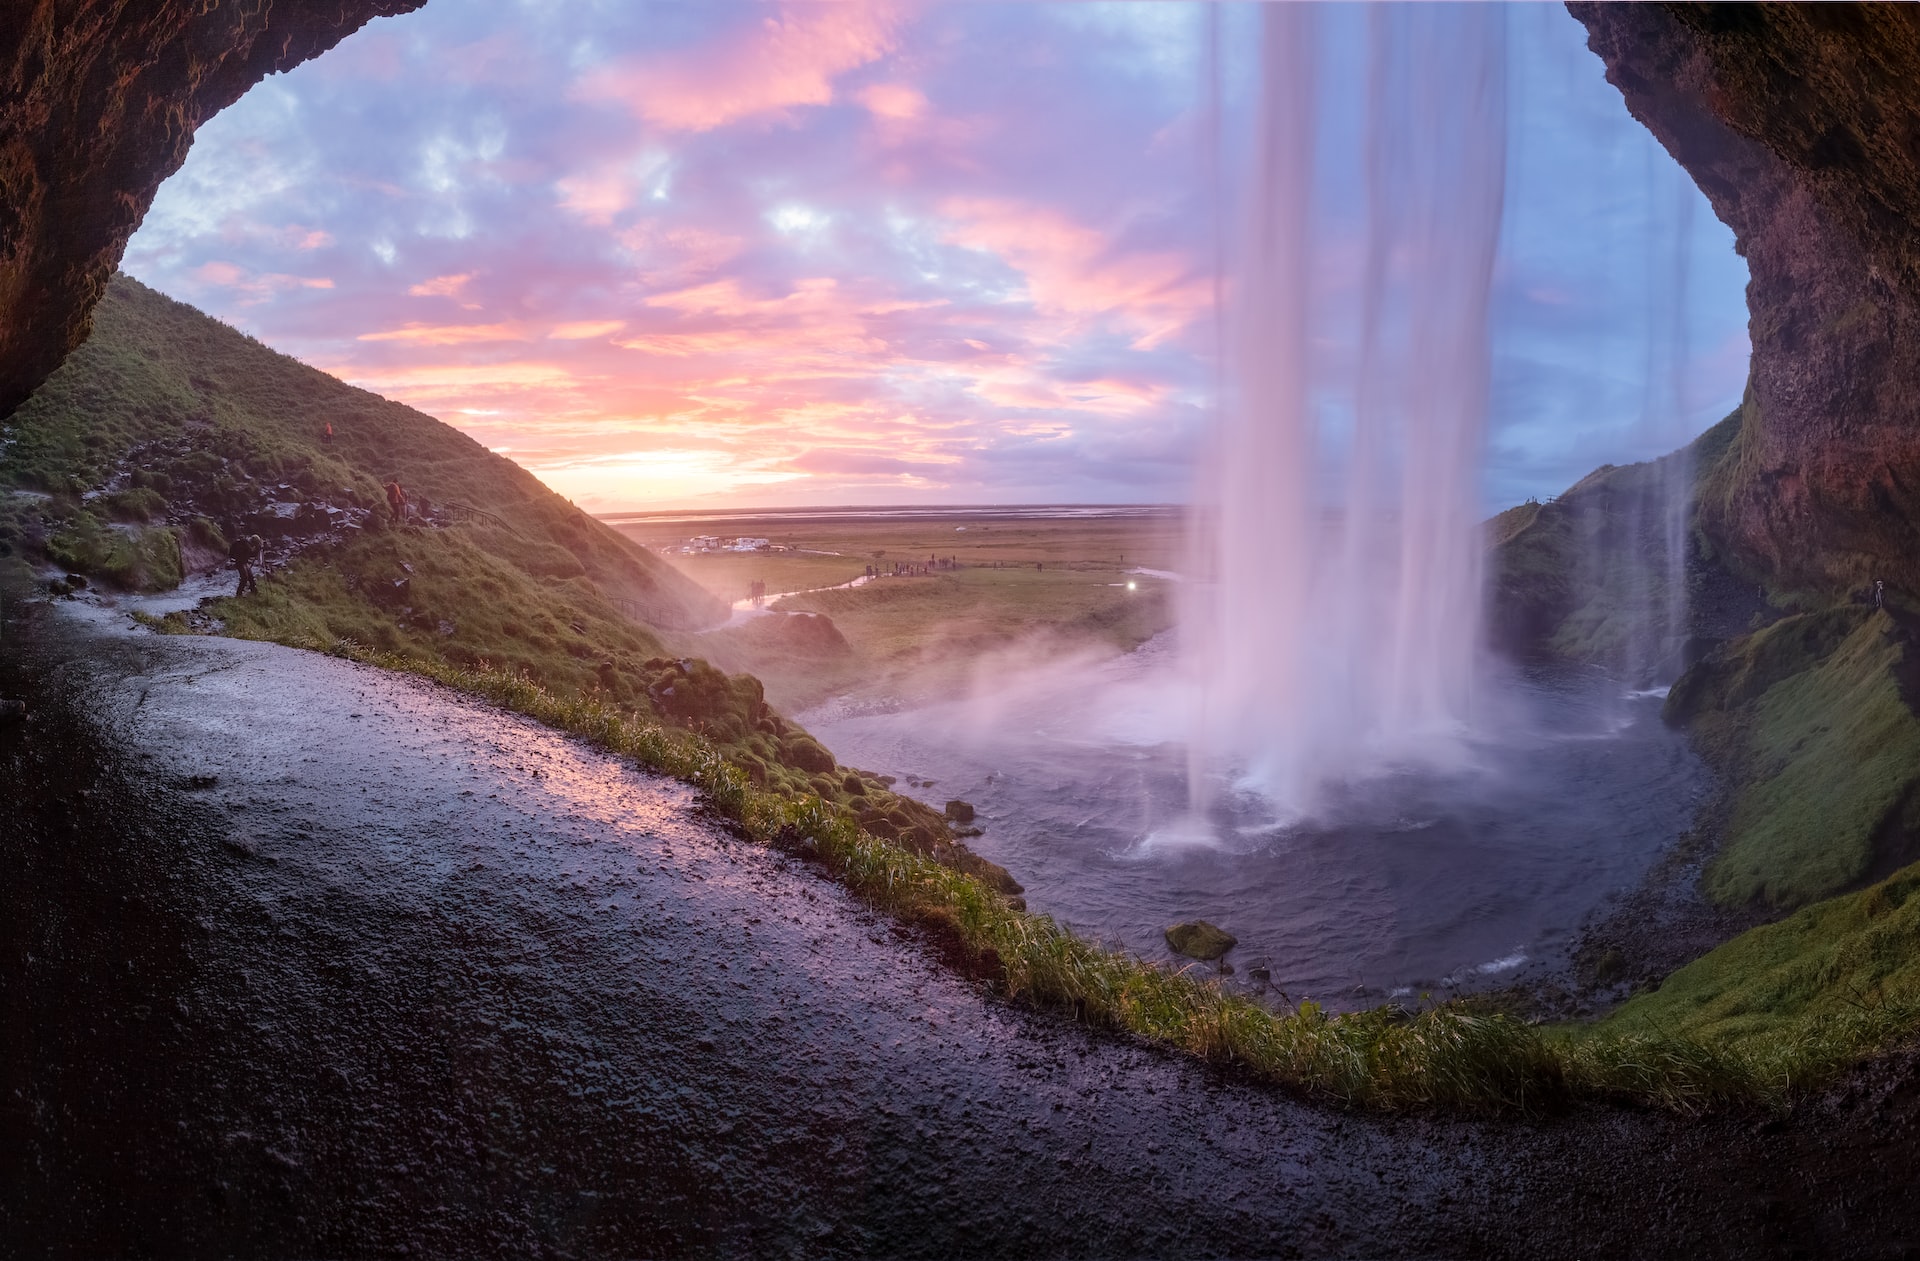 The Seljalandsfoss waterfall in Iceland painted pink thanks to a setting sun.